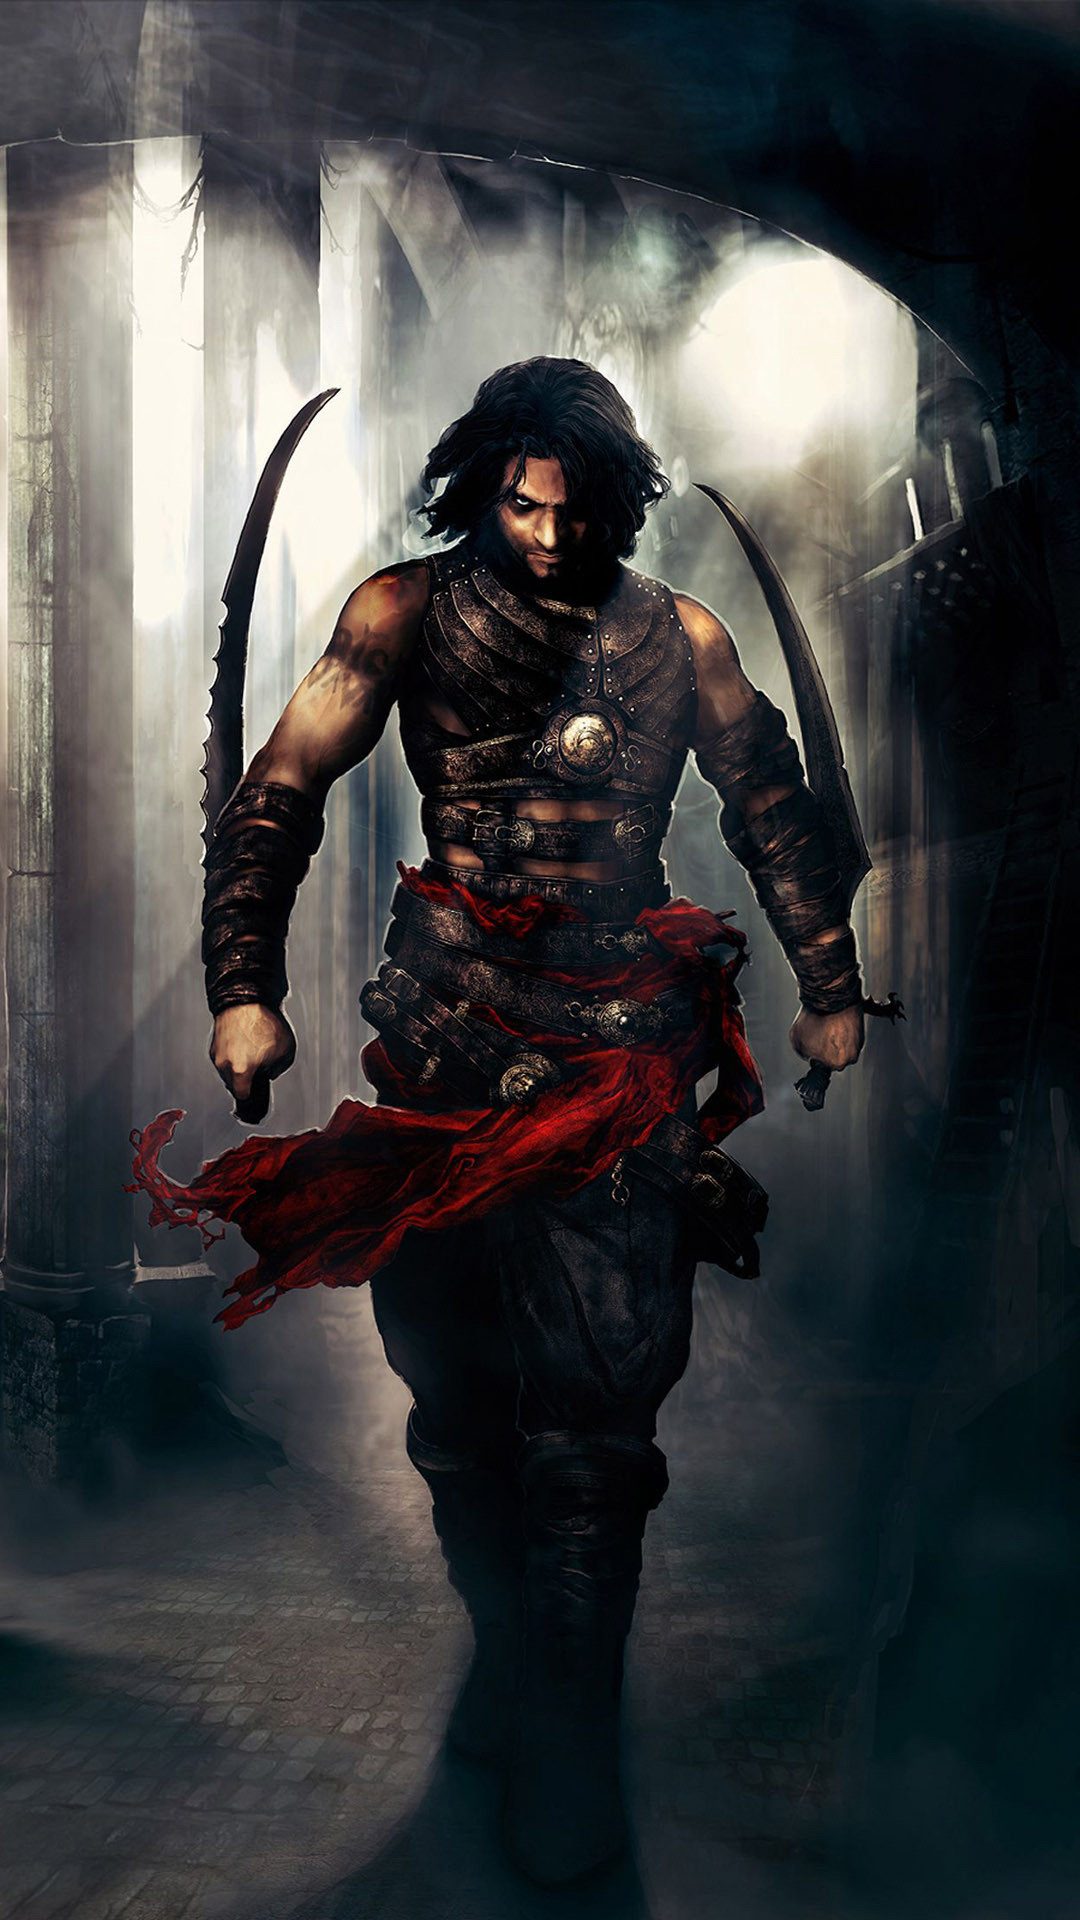 1080x1920 Prince Of Persia Wallpapers | Prince Of Persia Full HD Quality Wallpapers